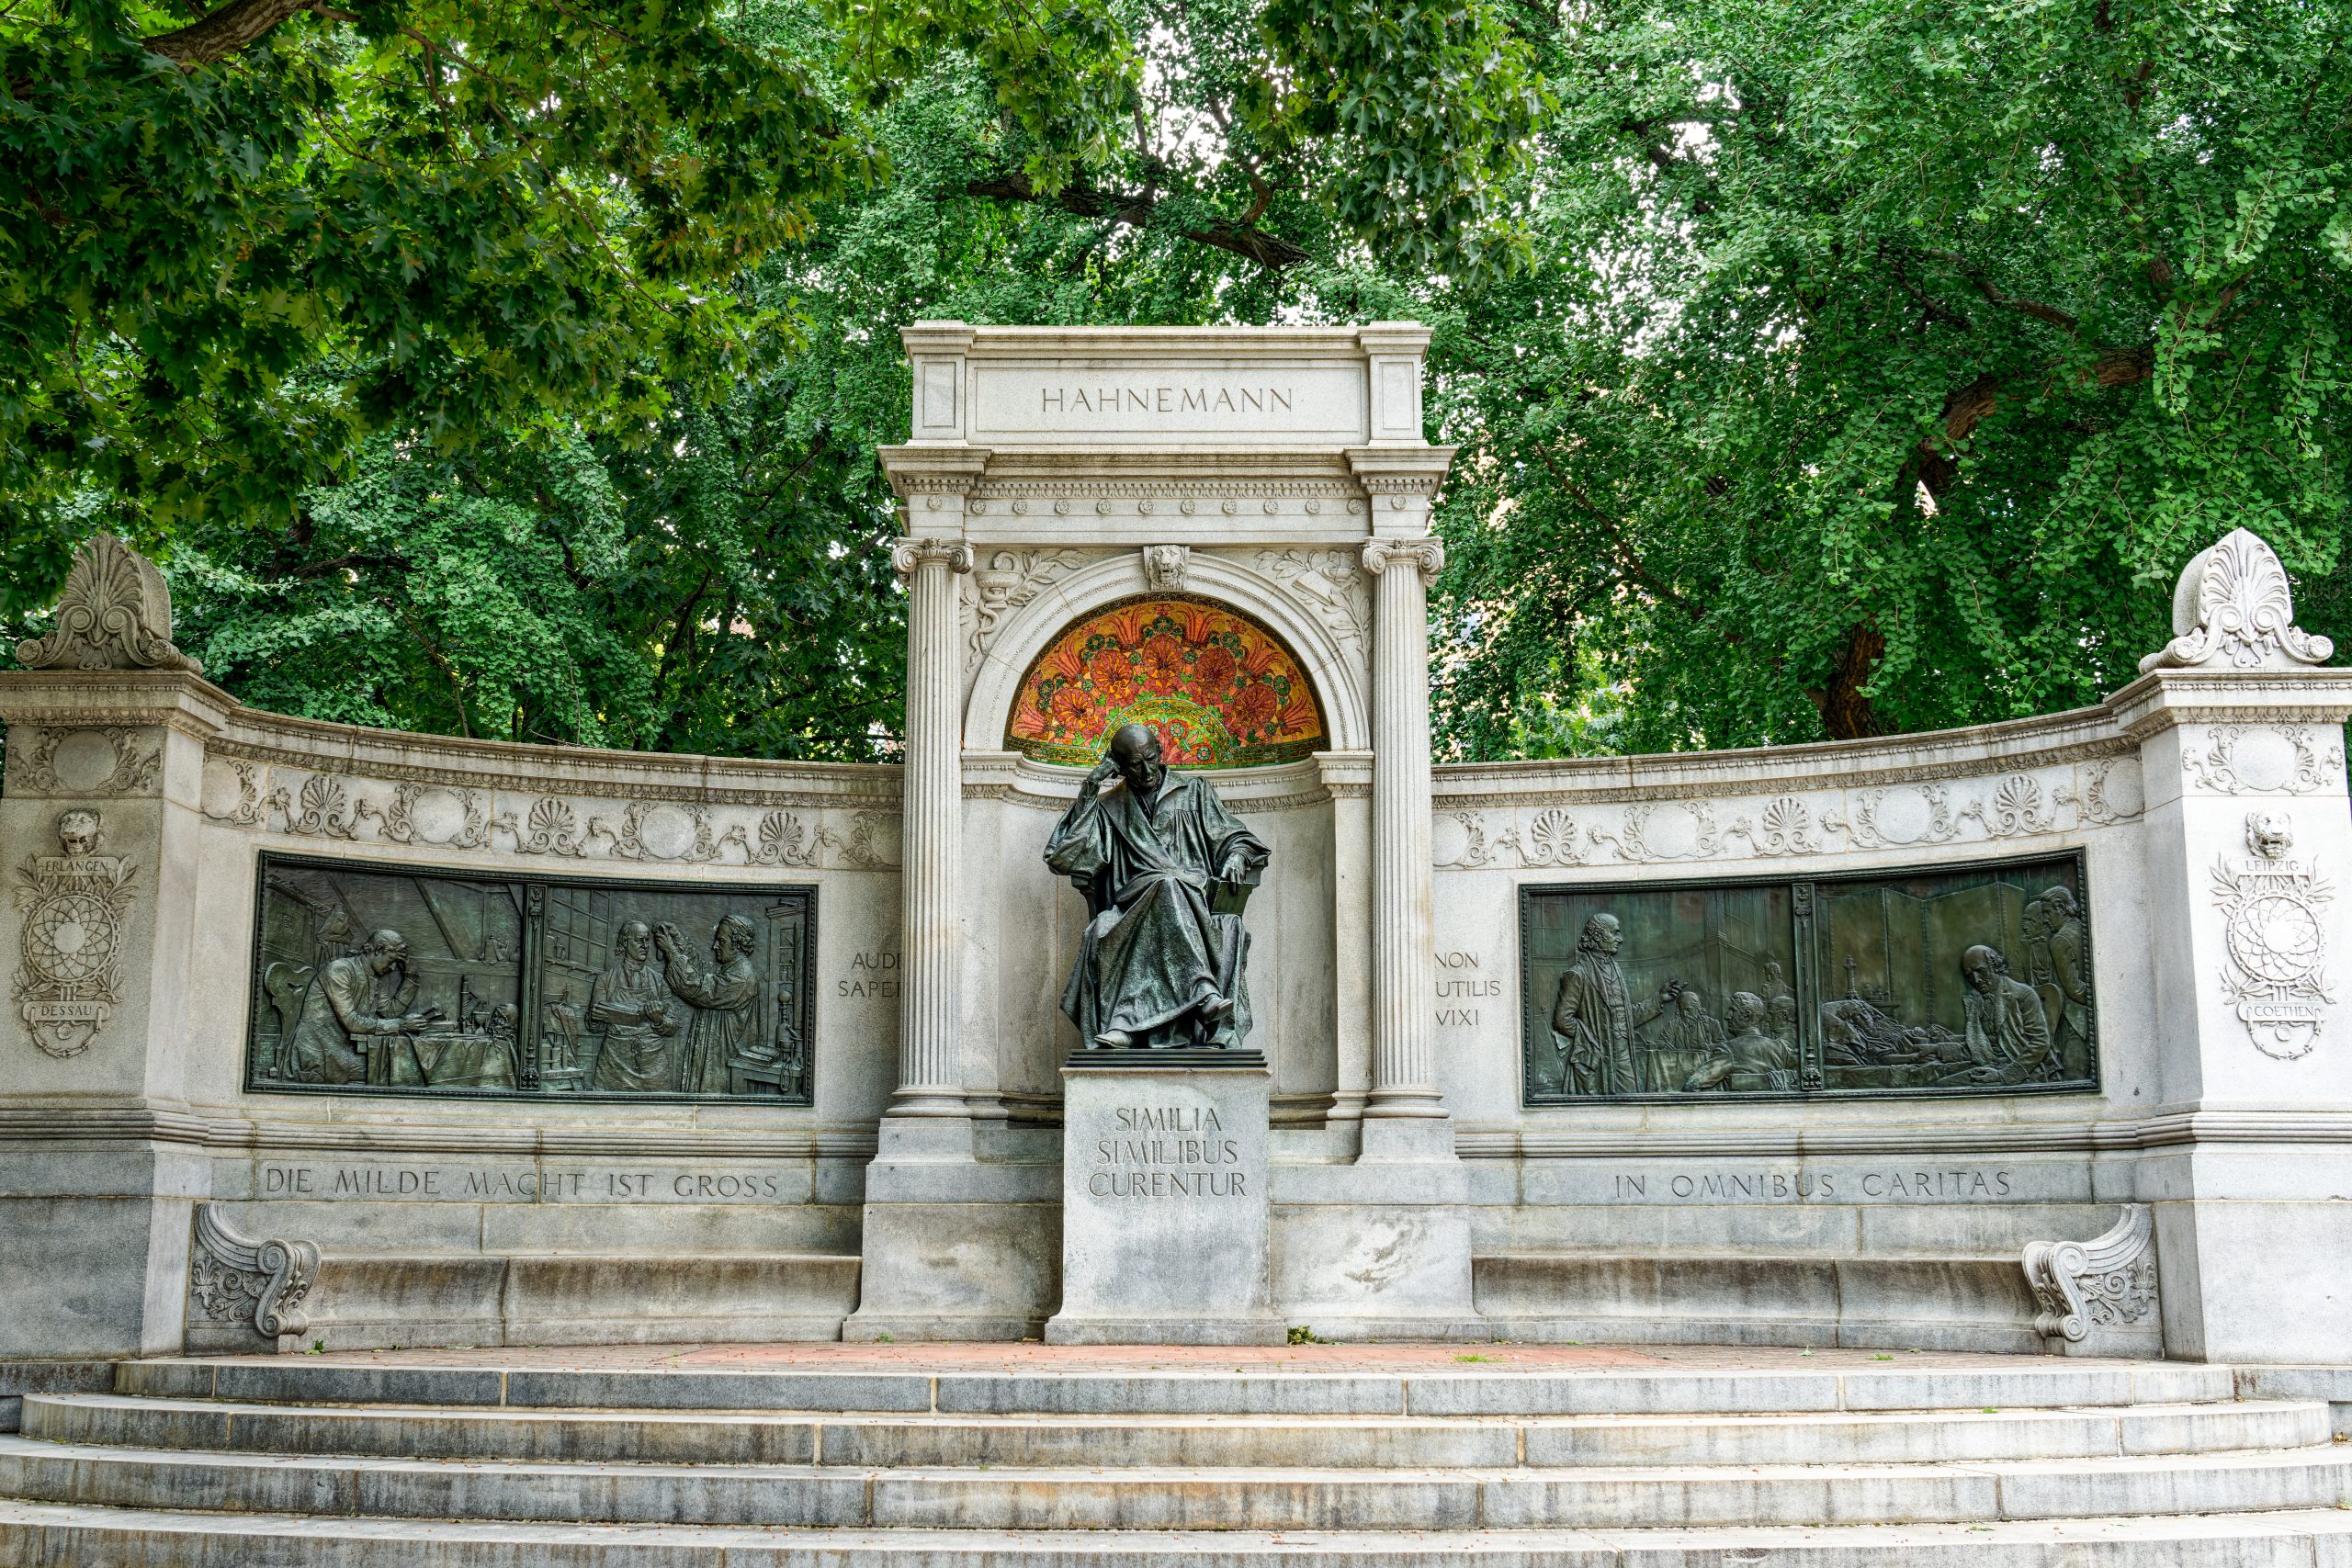 Washington, DC - June 27, 2022: Memorial to Samuel Hahnemann who was a German physician known for creating the system of alternative medicine called homeopathy.